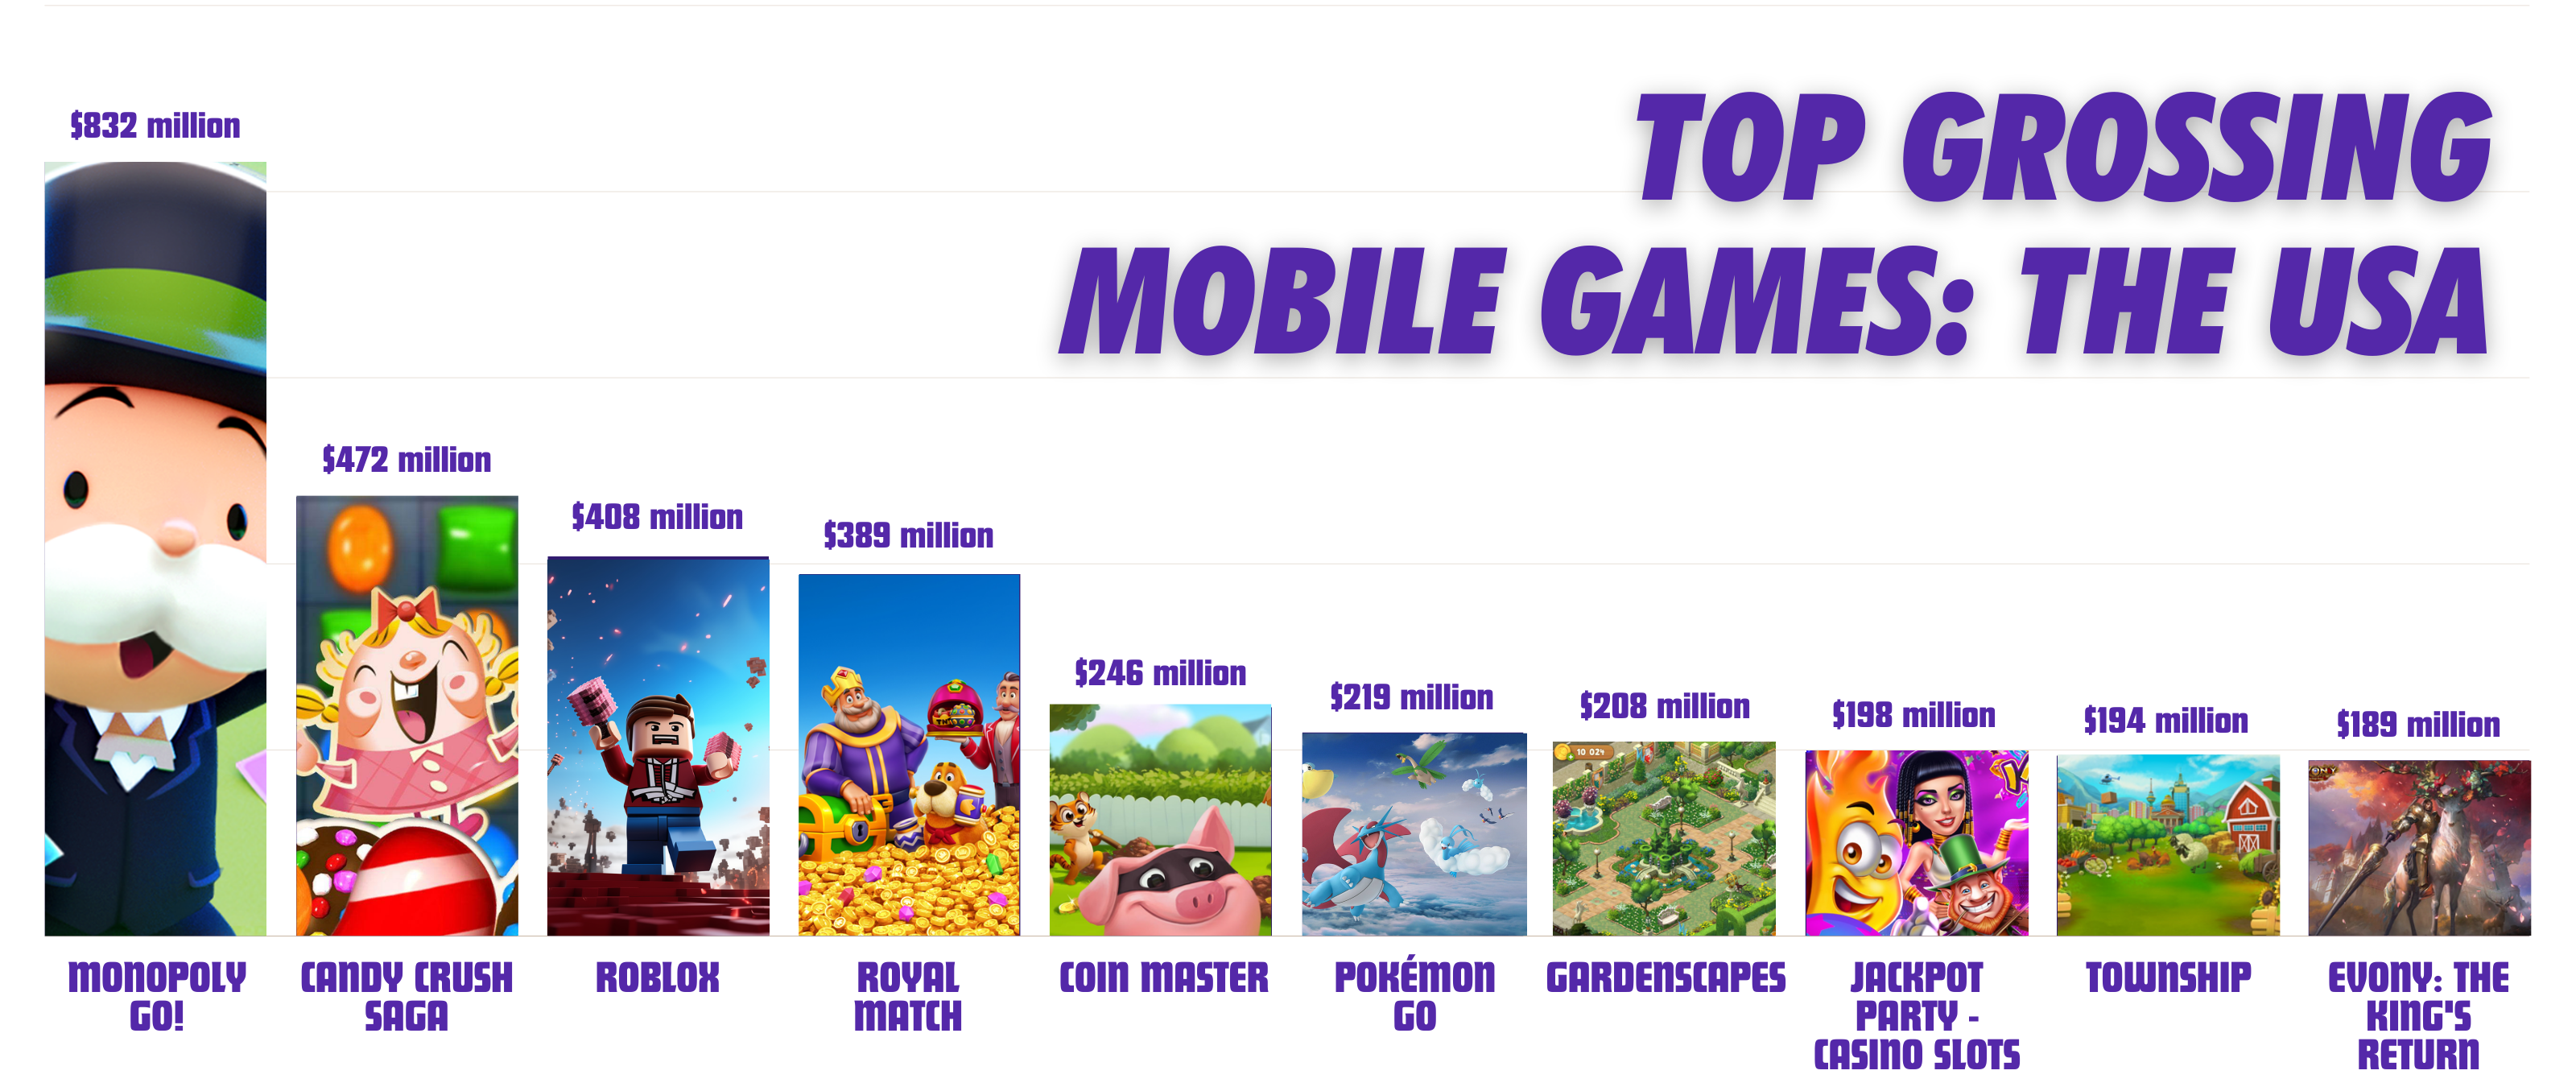 Top Grossing Mobile Games: The USA